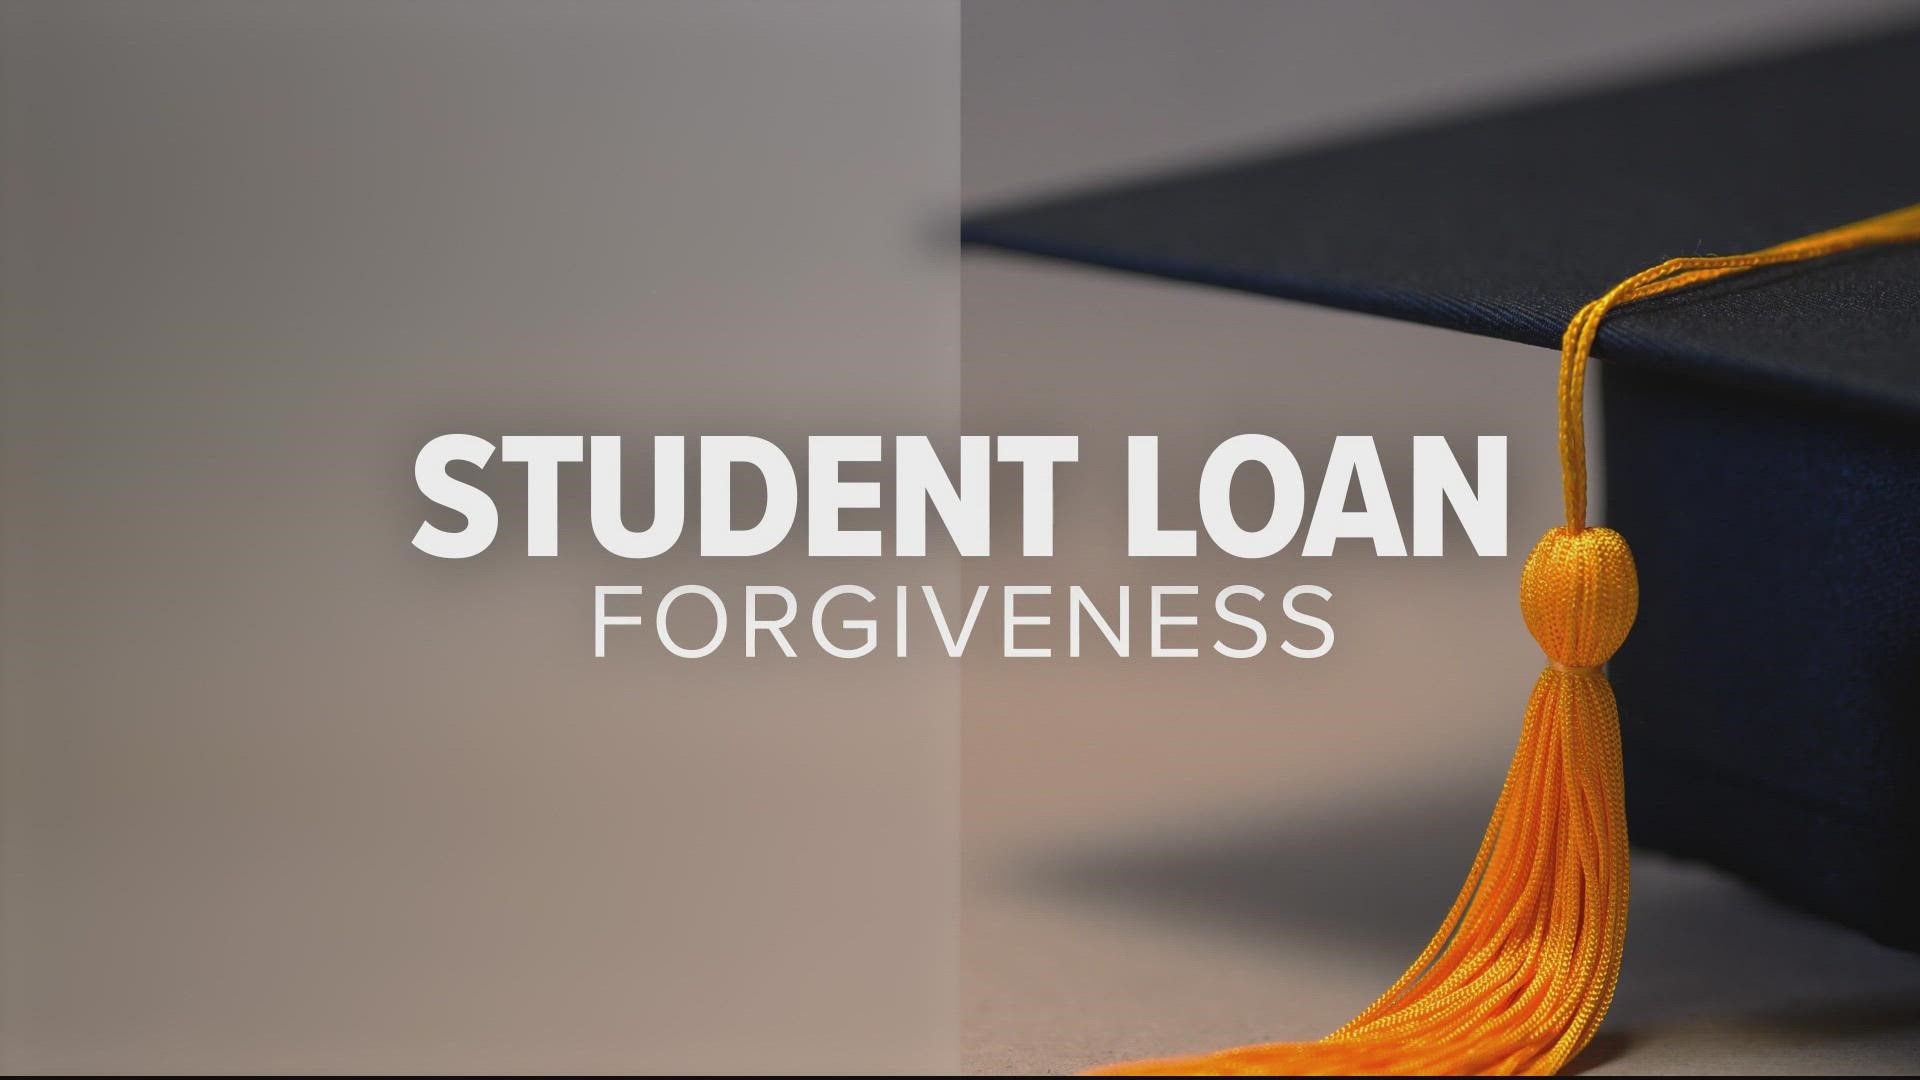 The student debt relief program was announced last week - canceling up to 20 thousand dollars in education loans for millions of borrowers.